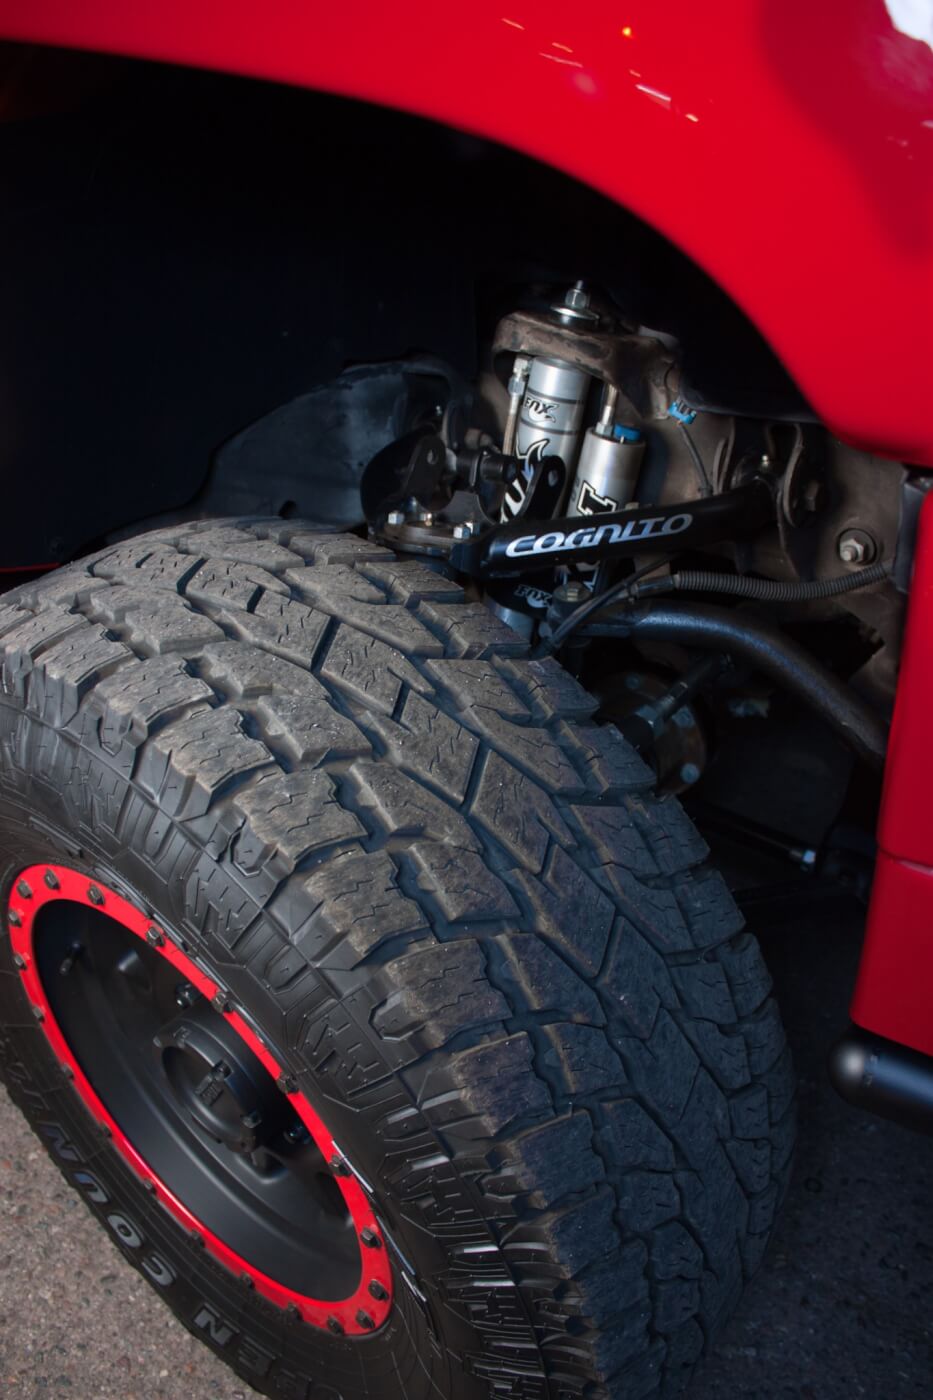 A full line of Cognito parts adorn Brian’s truck keeping the suspension strong and true in the harsh desert terrain. 